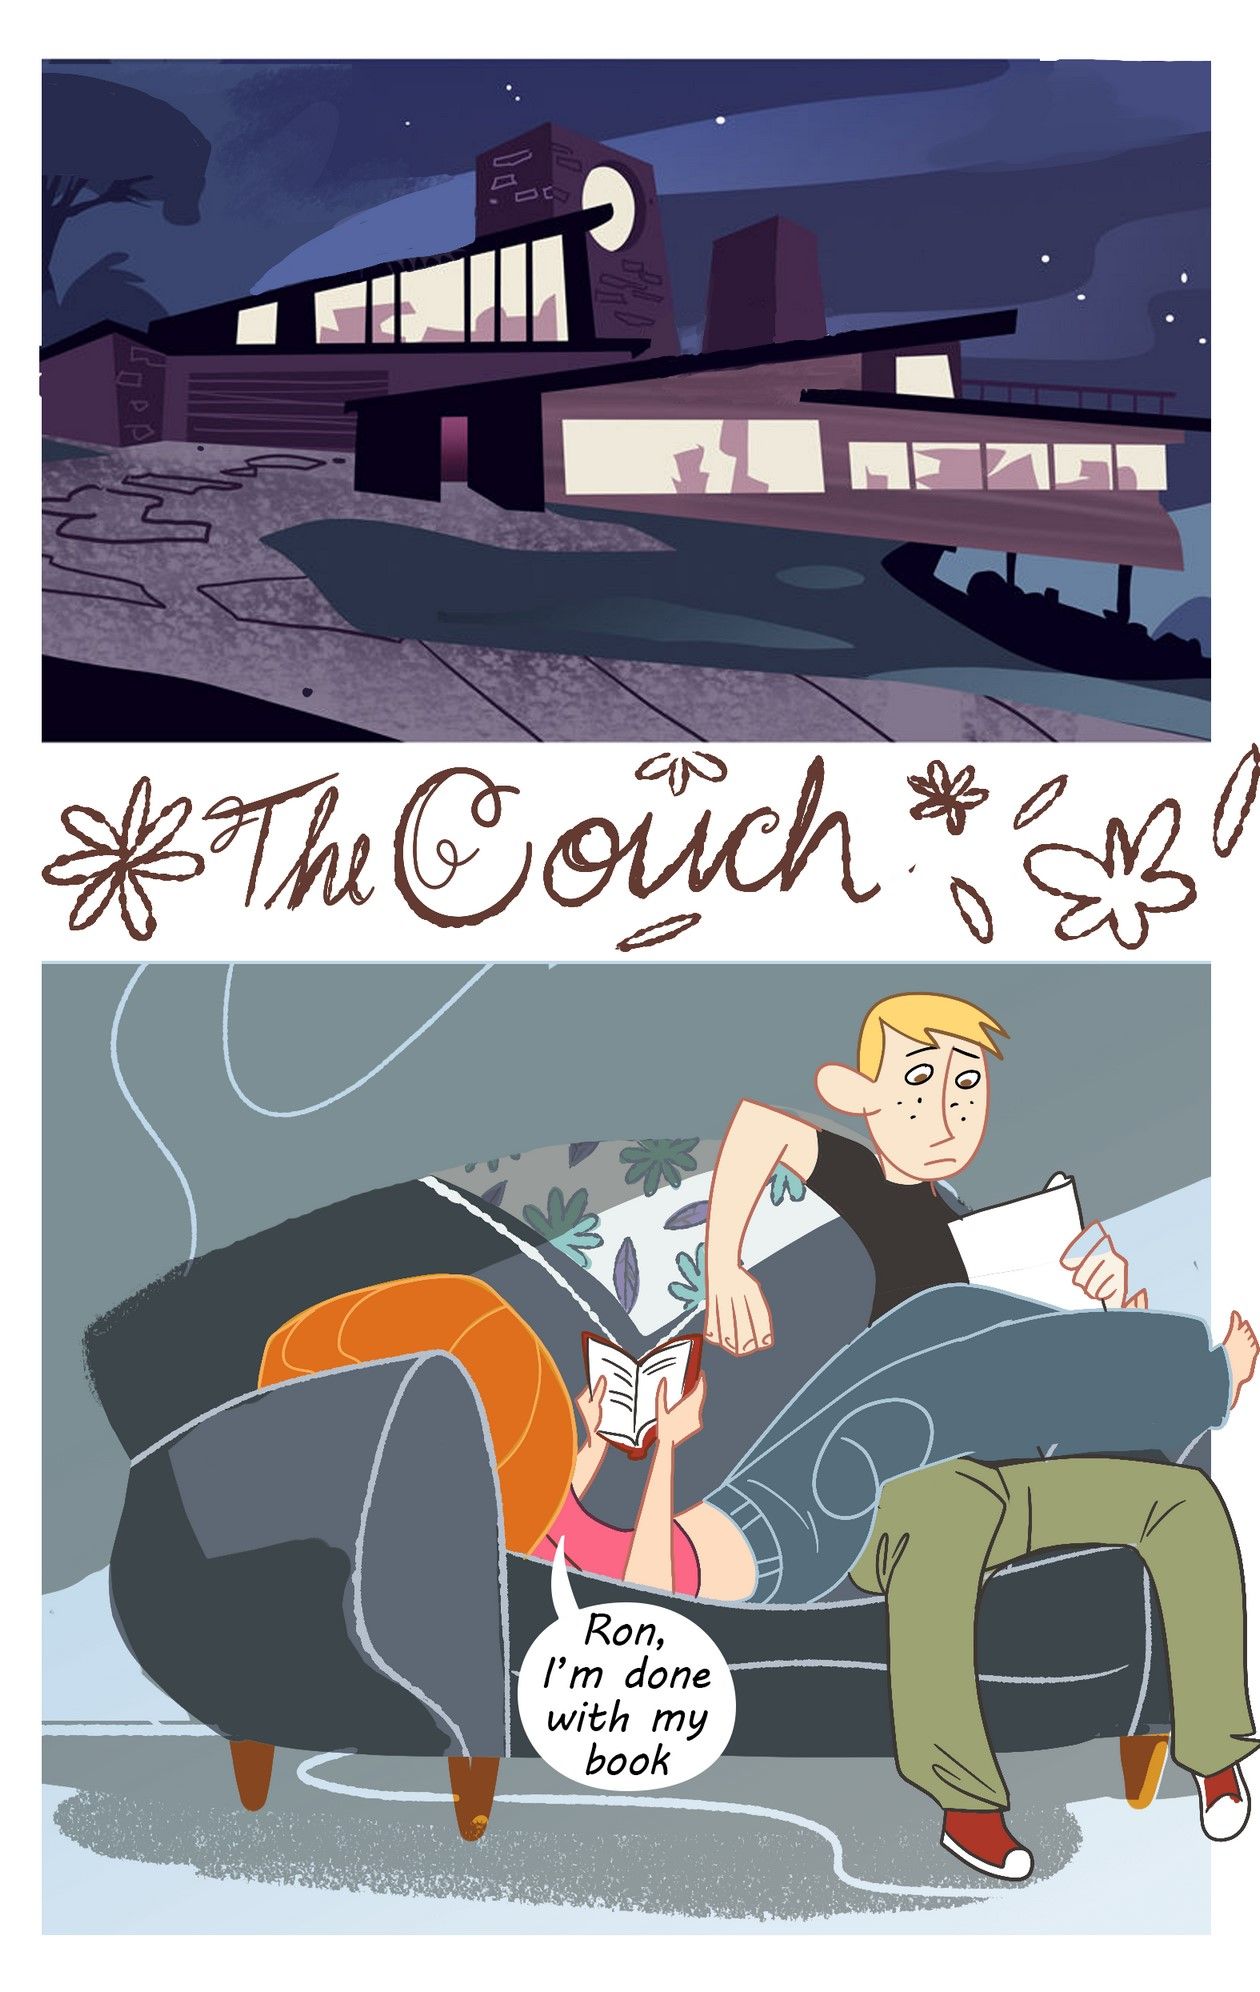 [Uanonkp] The Couch (Kim Possible) 1